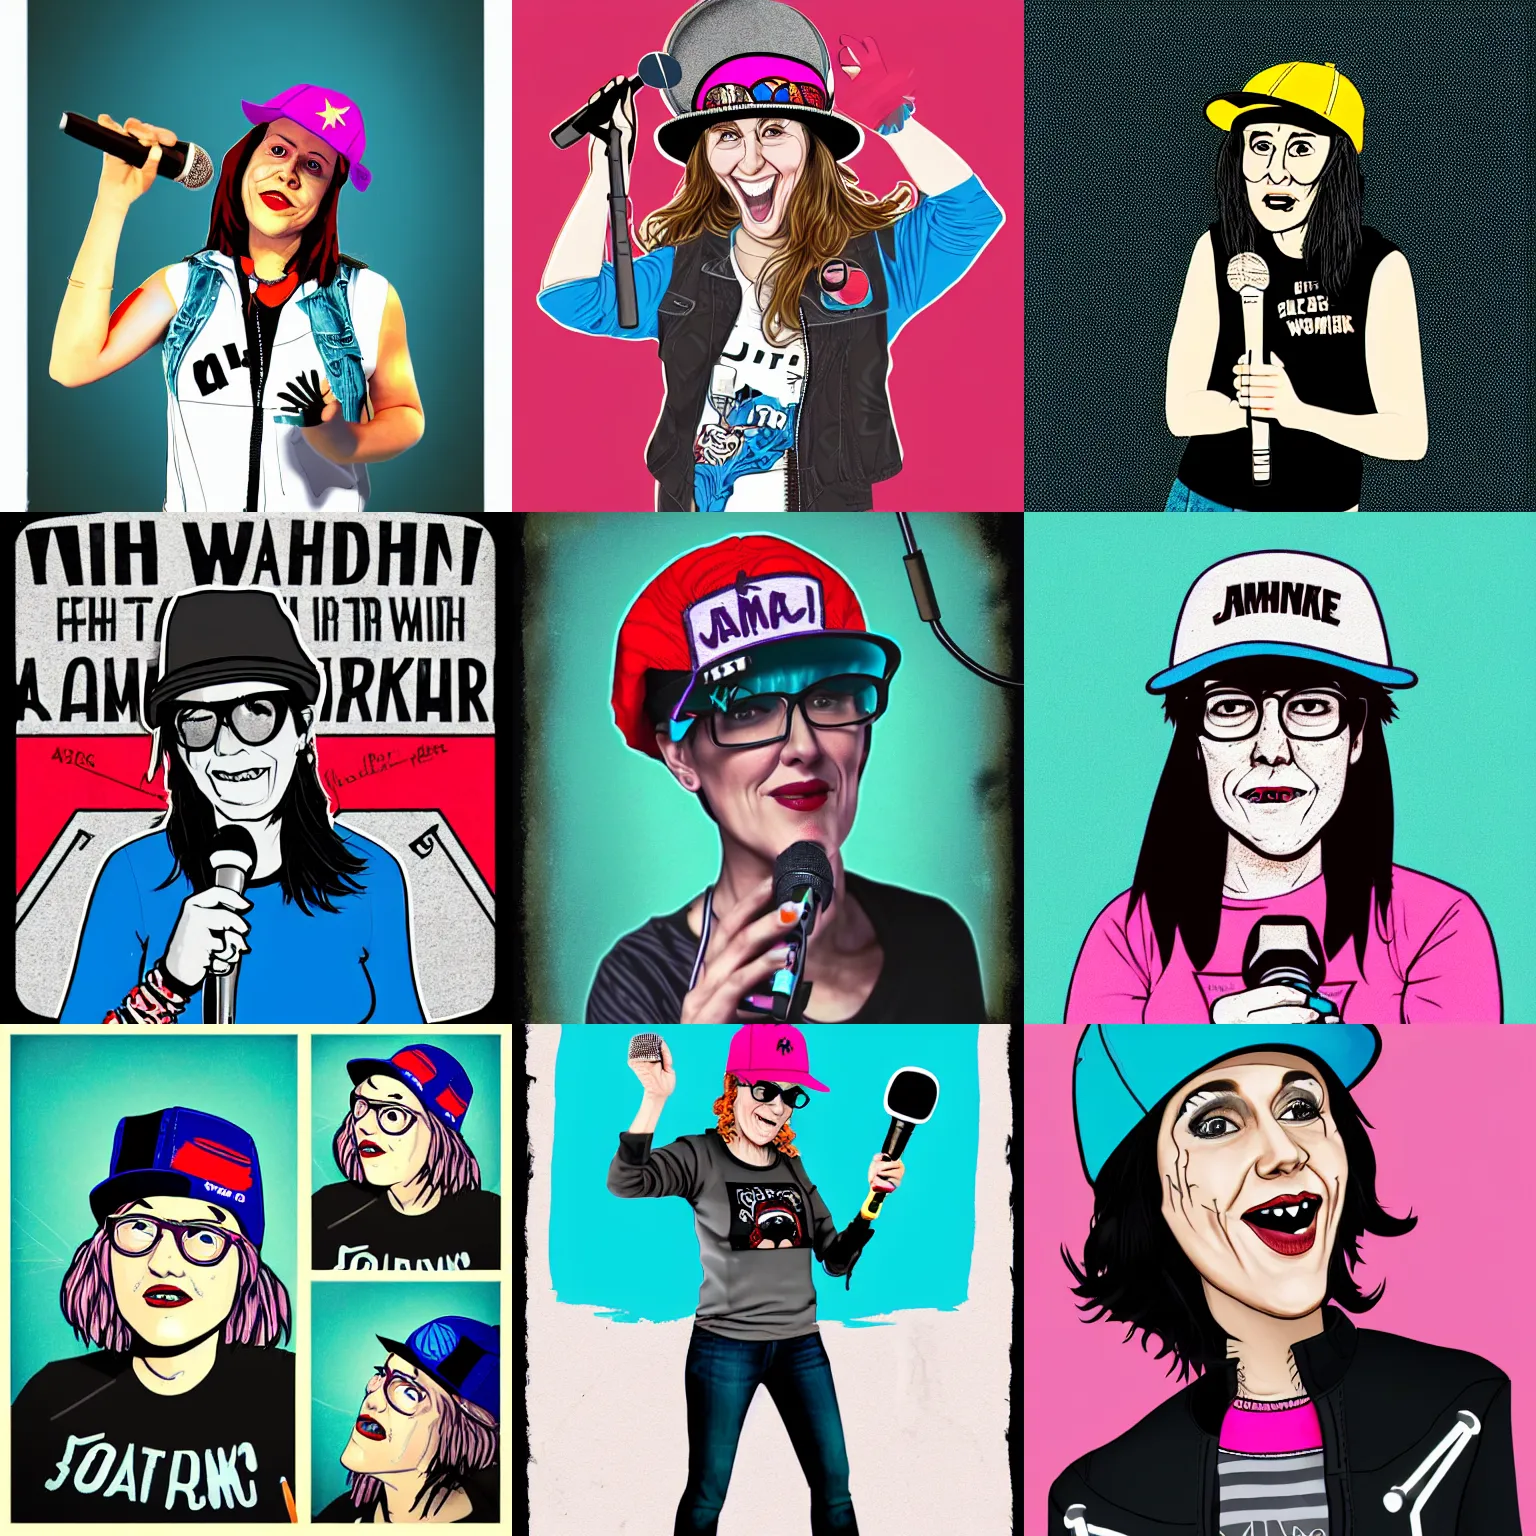 Prompt: a 3 8 year old woman with skatepunk style and flatbrim hat holding a microphone in her right hand, a character portrait by jane freilicher, tumblr contest winner, lowbrow, adafruit, lighthearted, contest winner